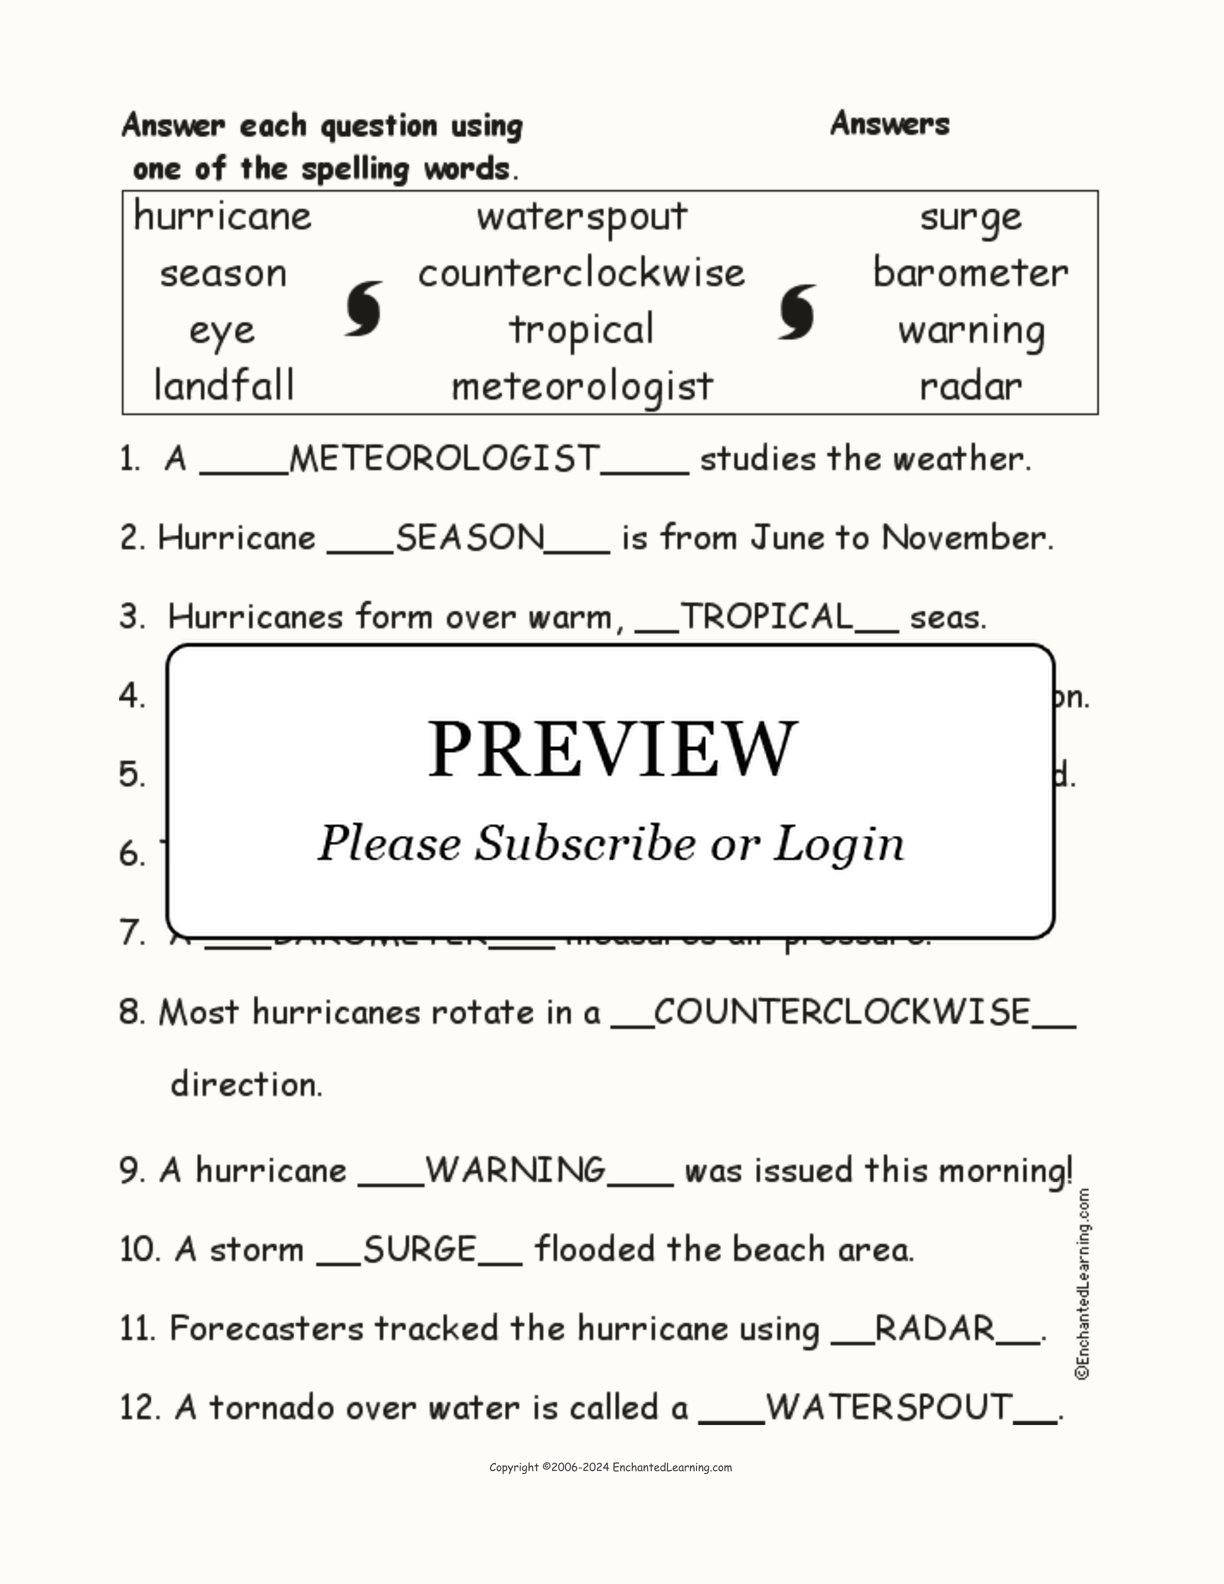 Hurricane Spelling Word Questions interactive worksheet page 2